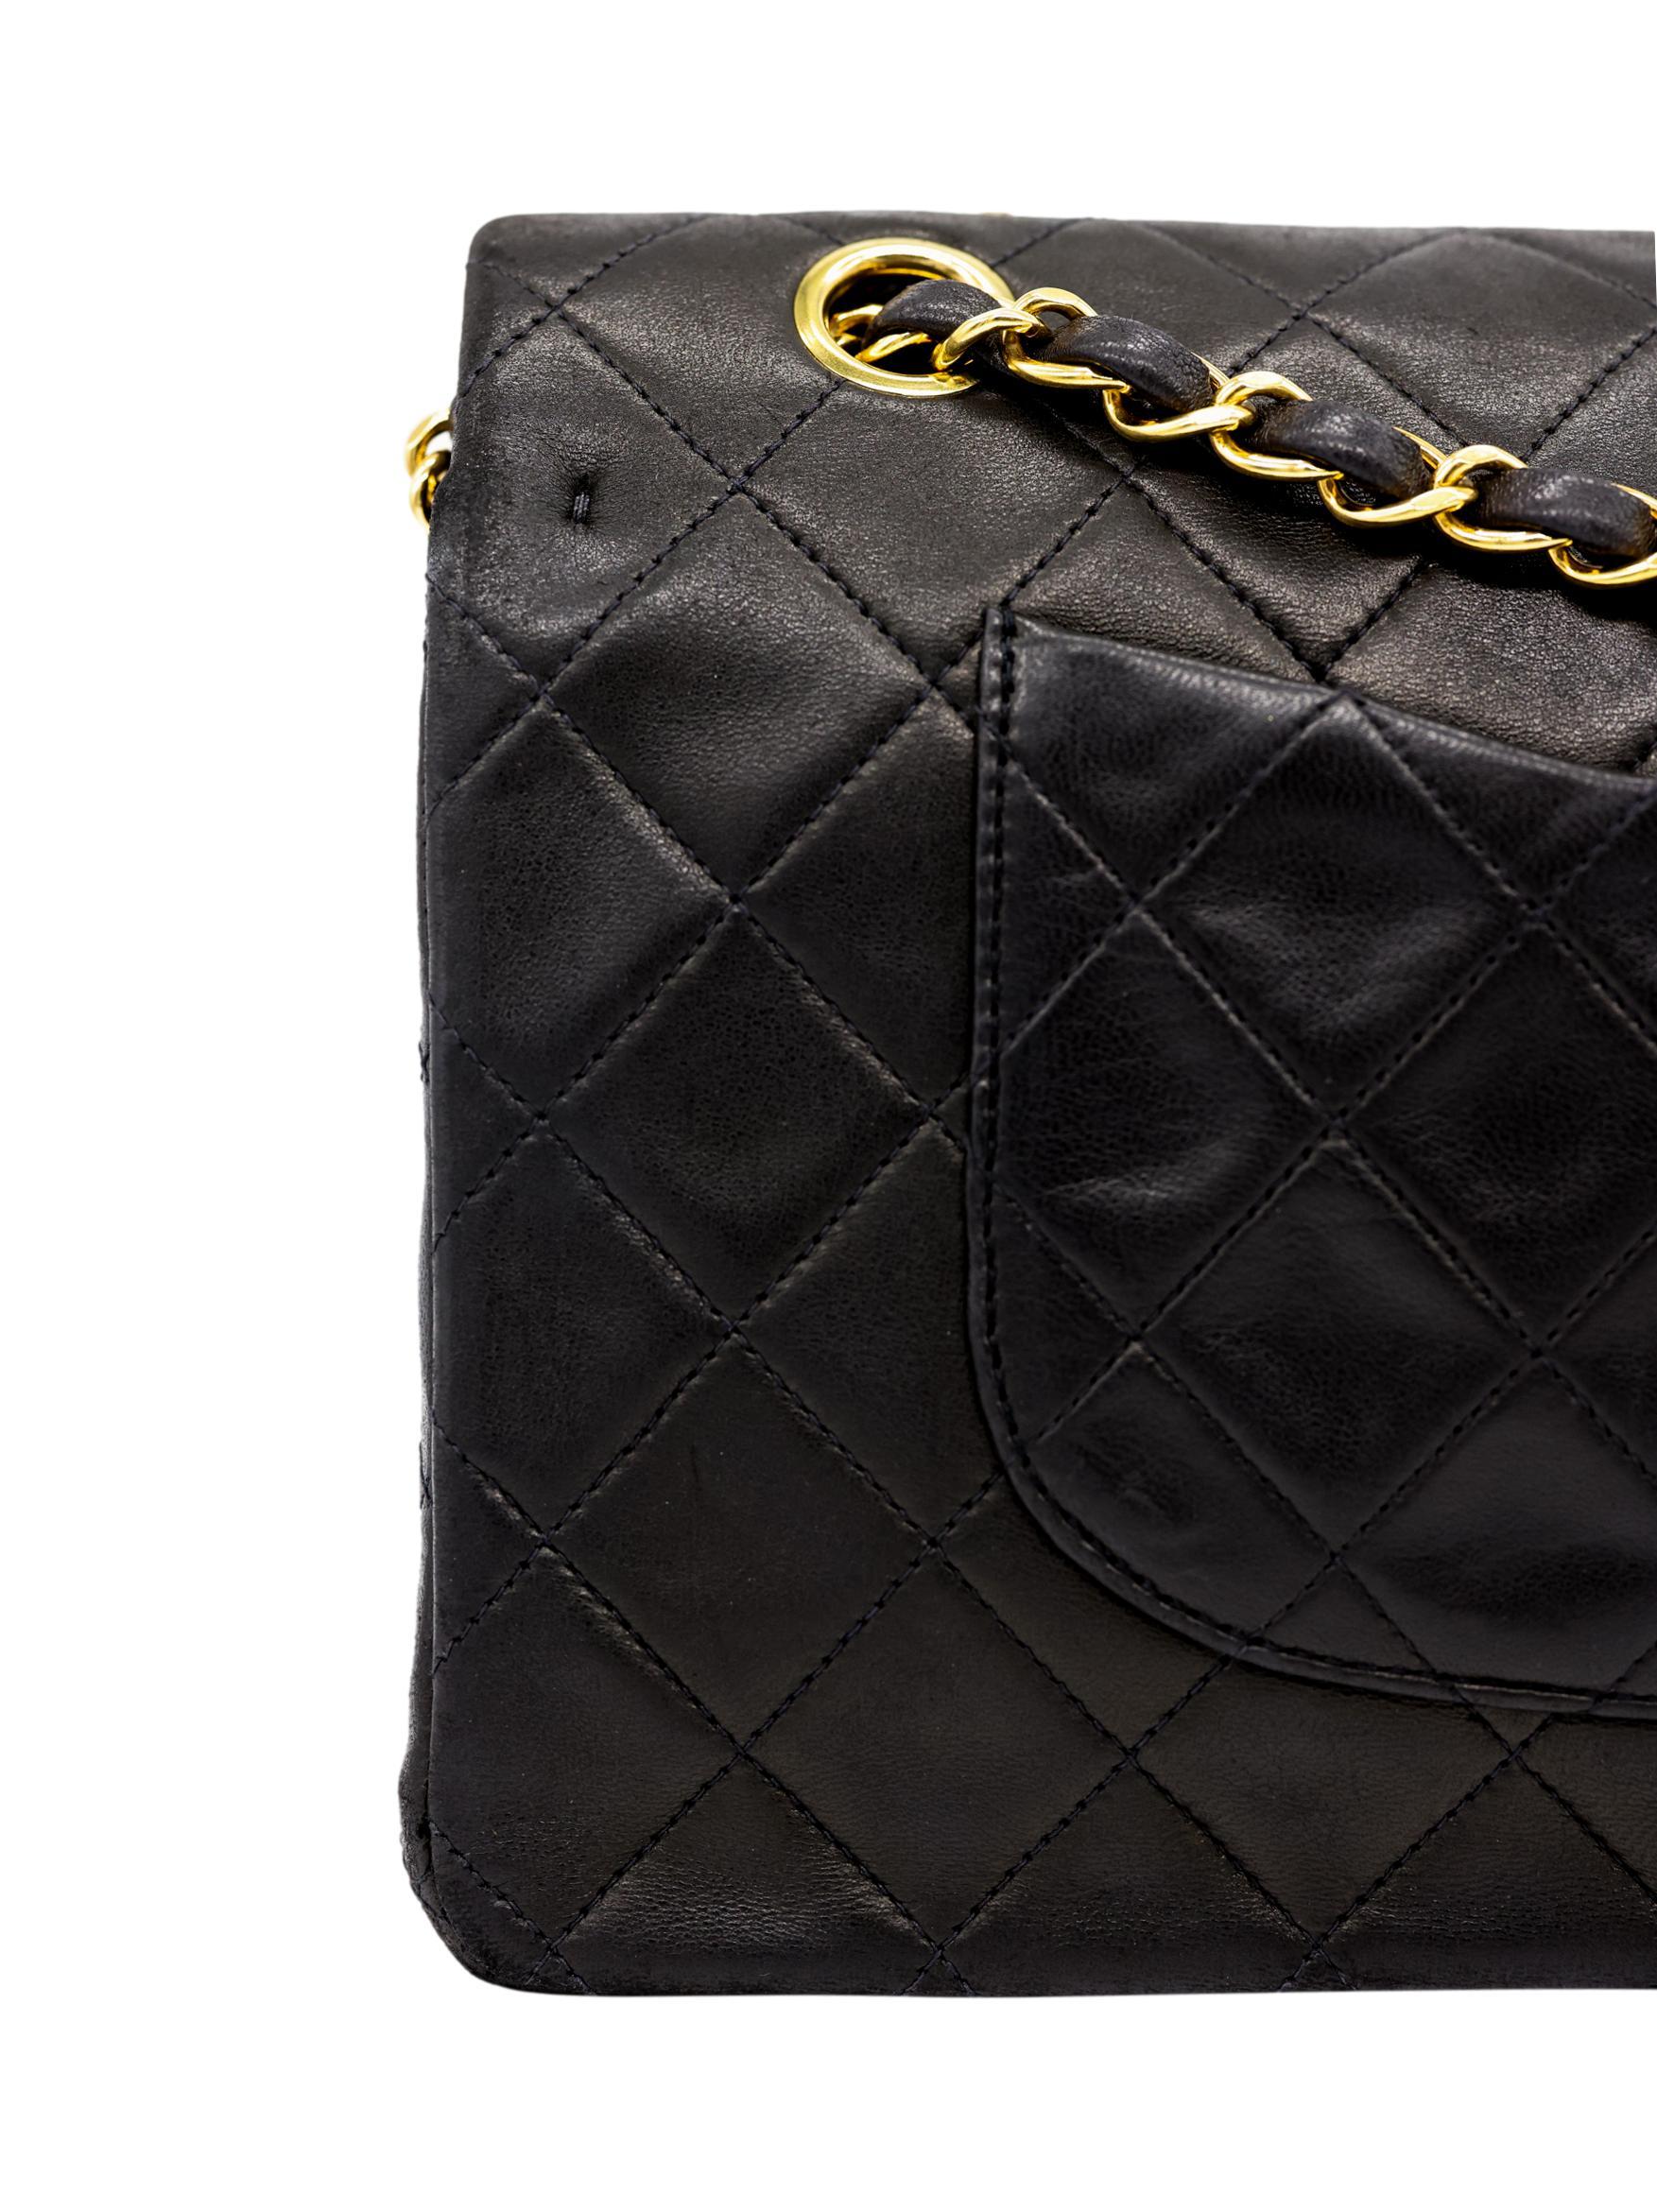 Chanel Timeless Black Medium Double Flap Quilted Lambskin Shoulder Bag, 2019. 5